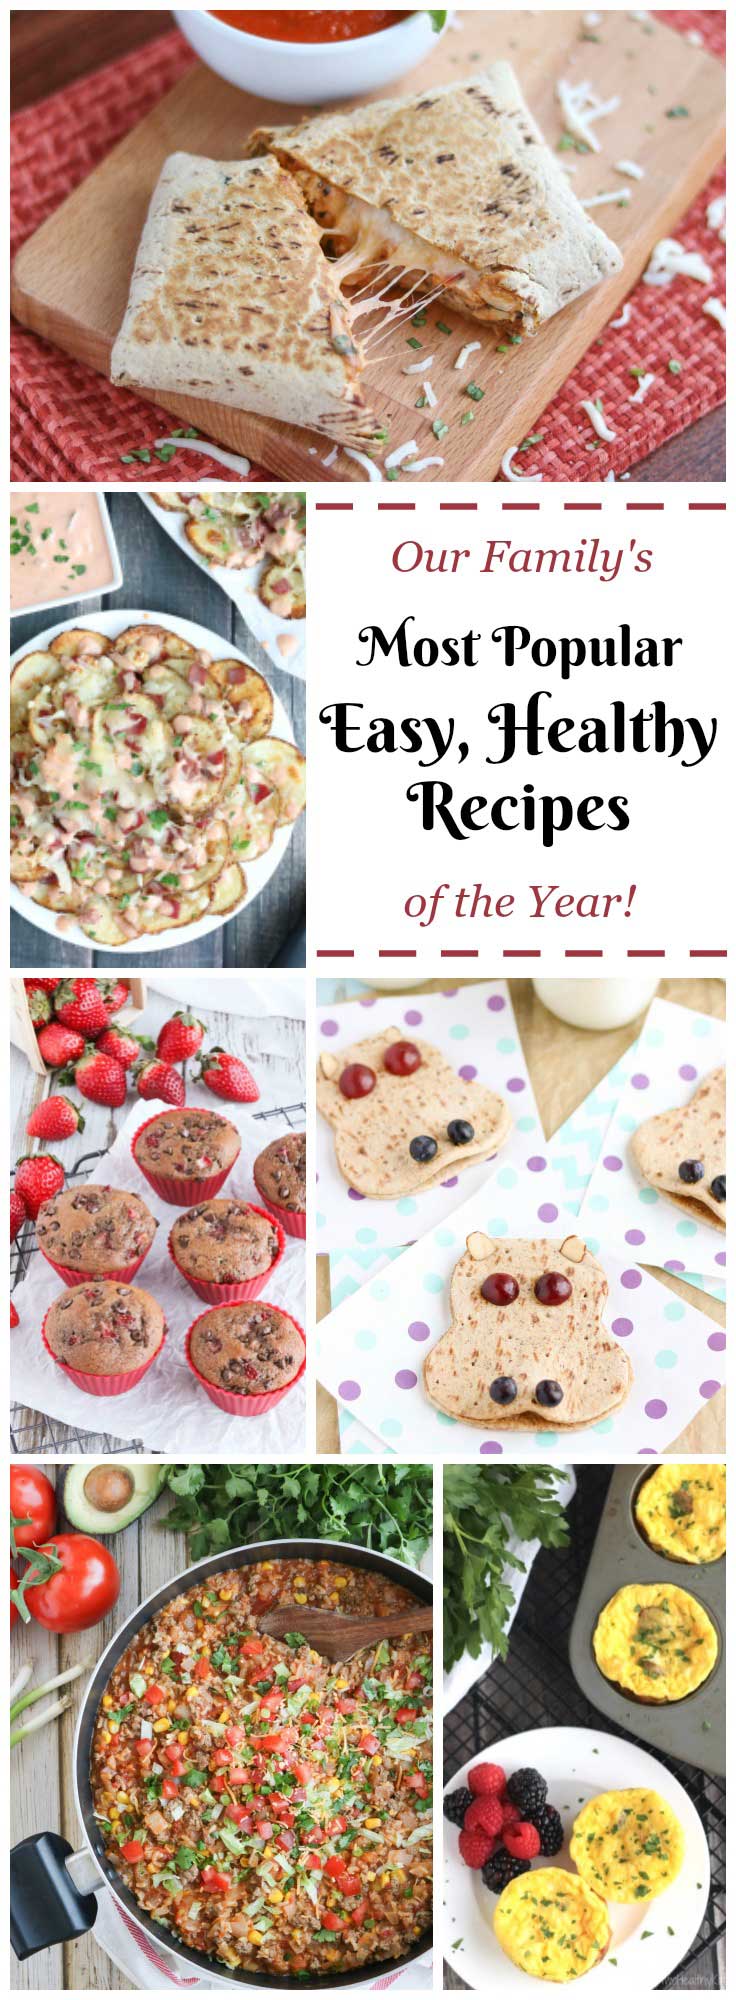 Easy, healthy recipes your whole family will love! These favorite recipes are absolute must-tries – our most popular recipes of the year! From the runaway hit recipe for our Chicken Parmesan Wraps to Crustless Breakfast Quiche Cups, a fast Taco Skillet Dinner … and even 2-Ingredient Dog Treats! These easy recipes are healthy and delicious, and so quick and easy, too! Easy weeknight dinners, make-ahead breakfasts, grab-and-go meals, freezer meals, and more! | www.TwoHealthyKitchens.com